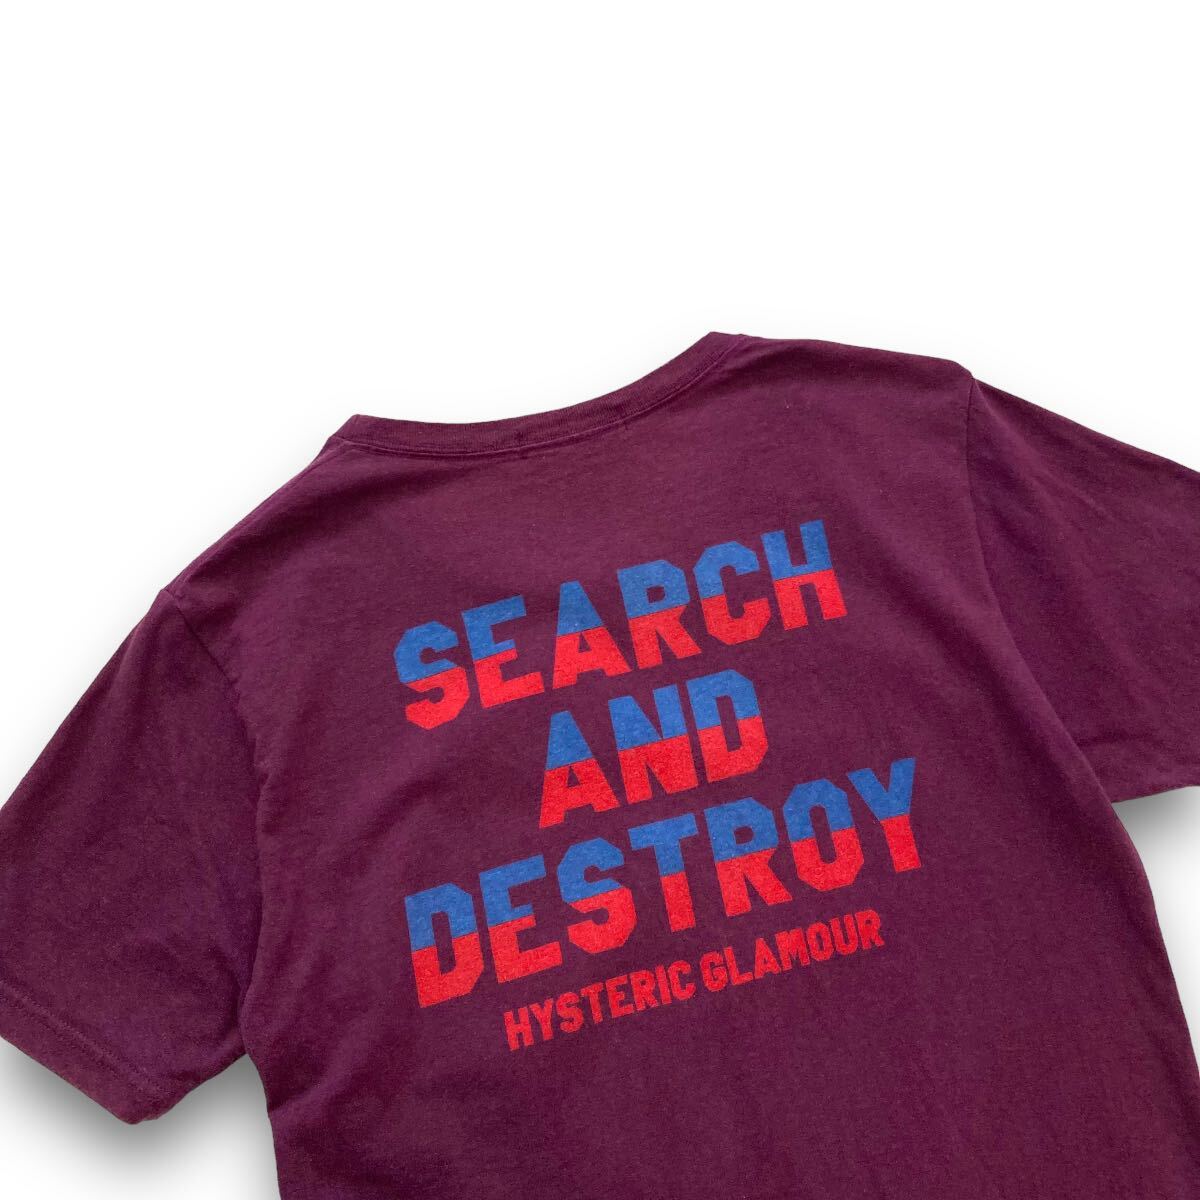 【HYSTERIC GLAMOUR】ヒステリックグラマー プリントTシャツ MICHIGAN SEARCH AND DESTROY ヒスガール アメリカ星条旗 半袖Tシャツ エンジ